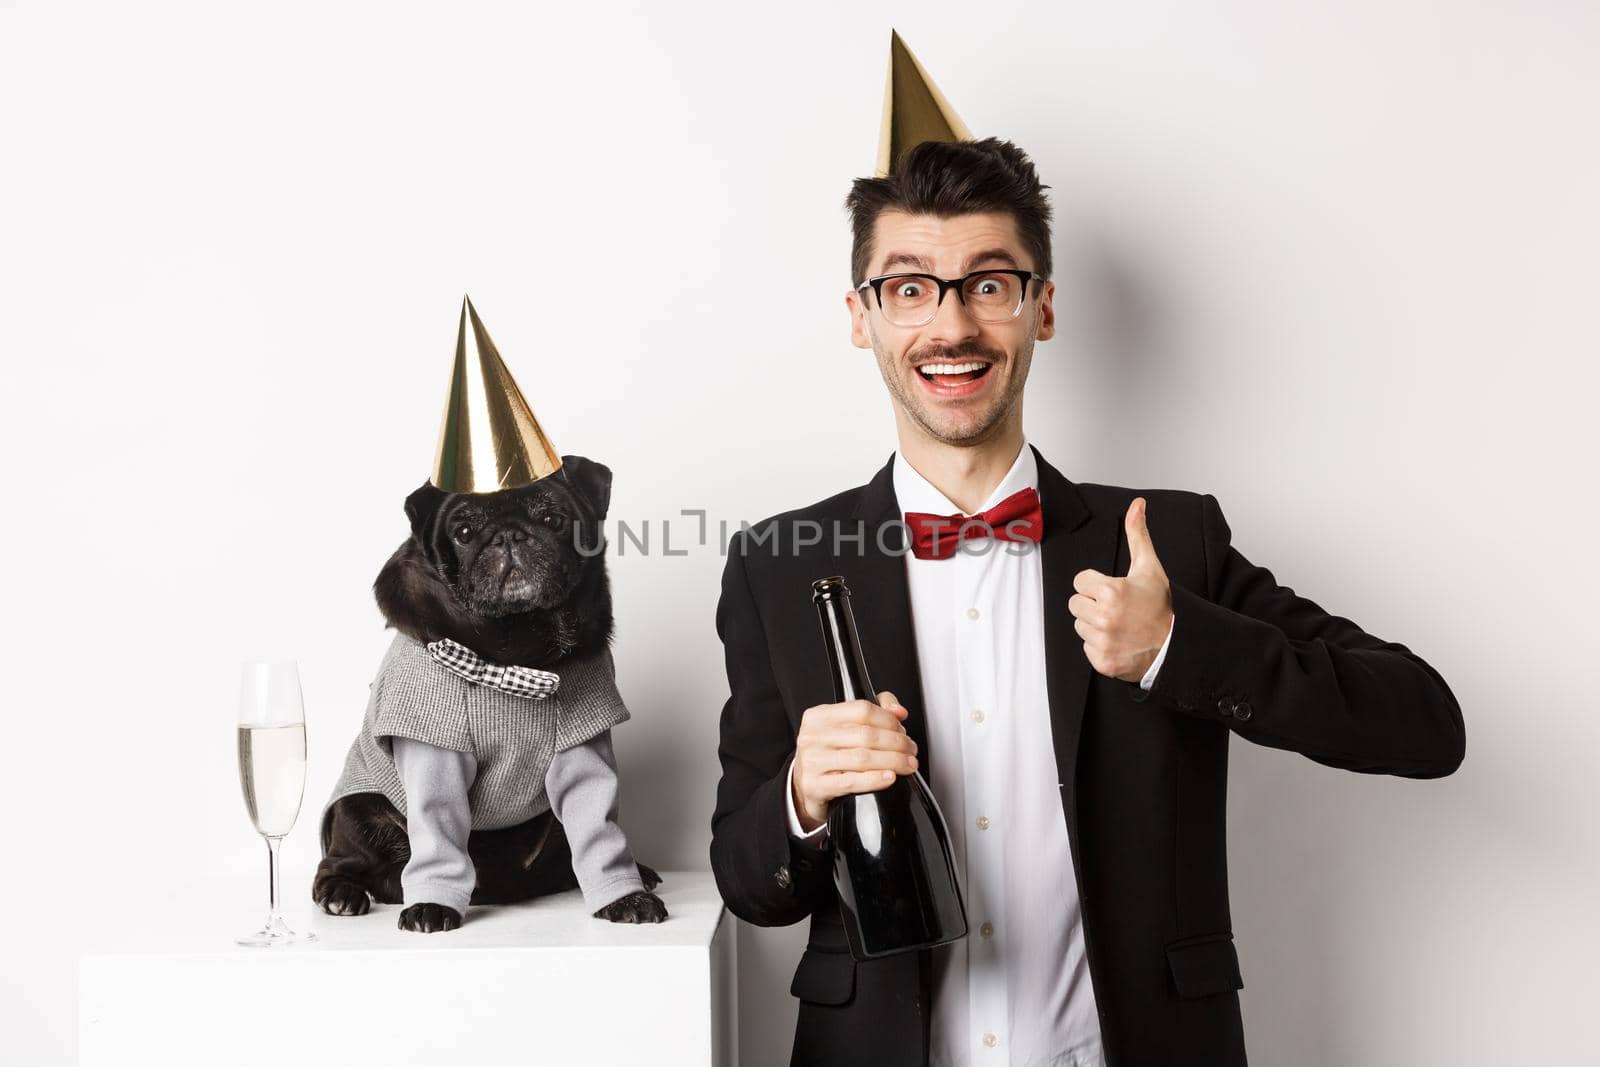 Small black dog wearing party hat and standing near happy man celebrating holiday, owner showing thumb-up and holding champagne bottle, white background.